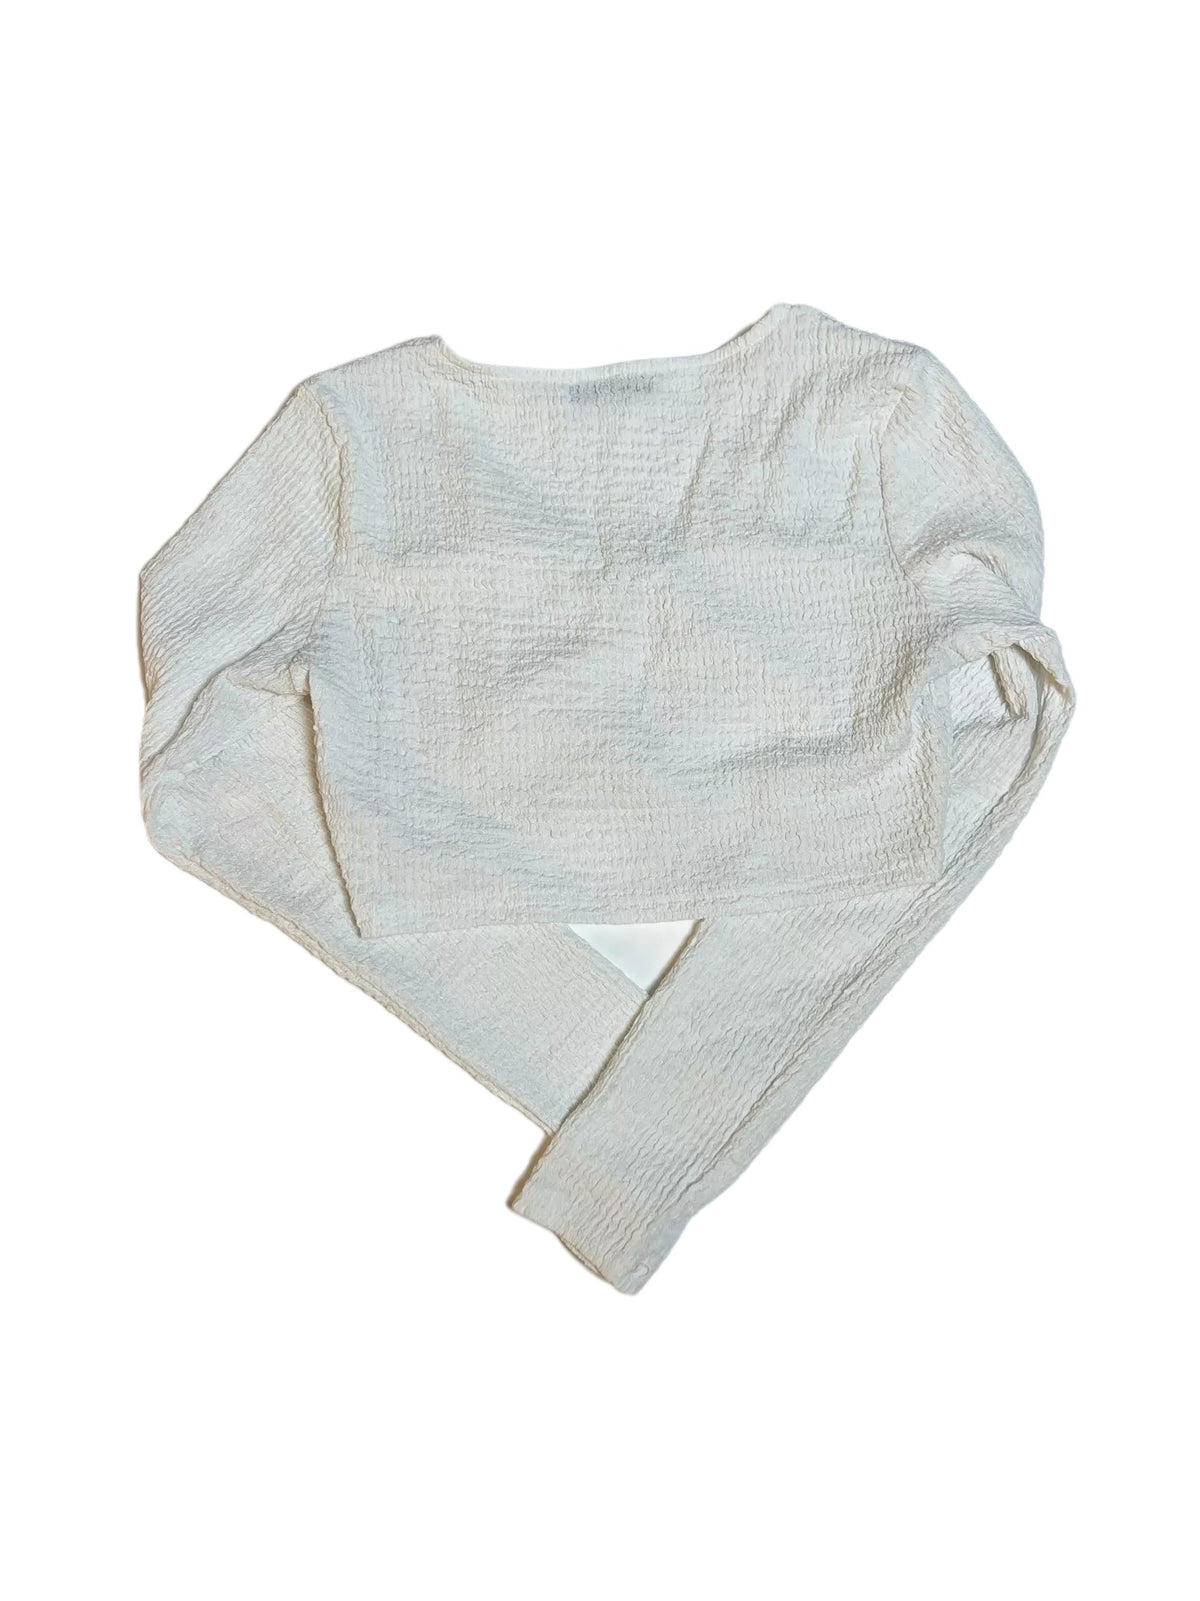 Just Quella- White Long Sleeve Cut Out Crop Top